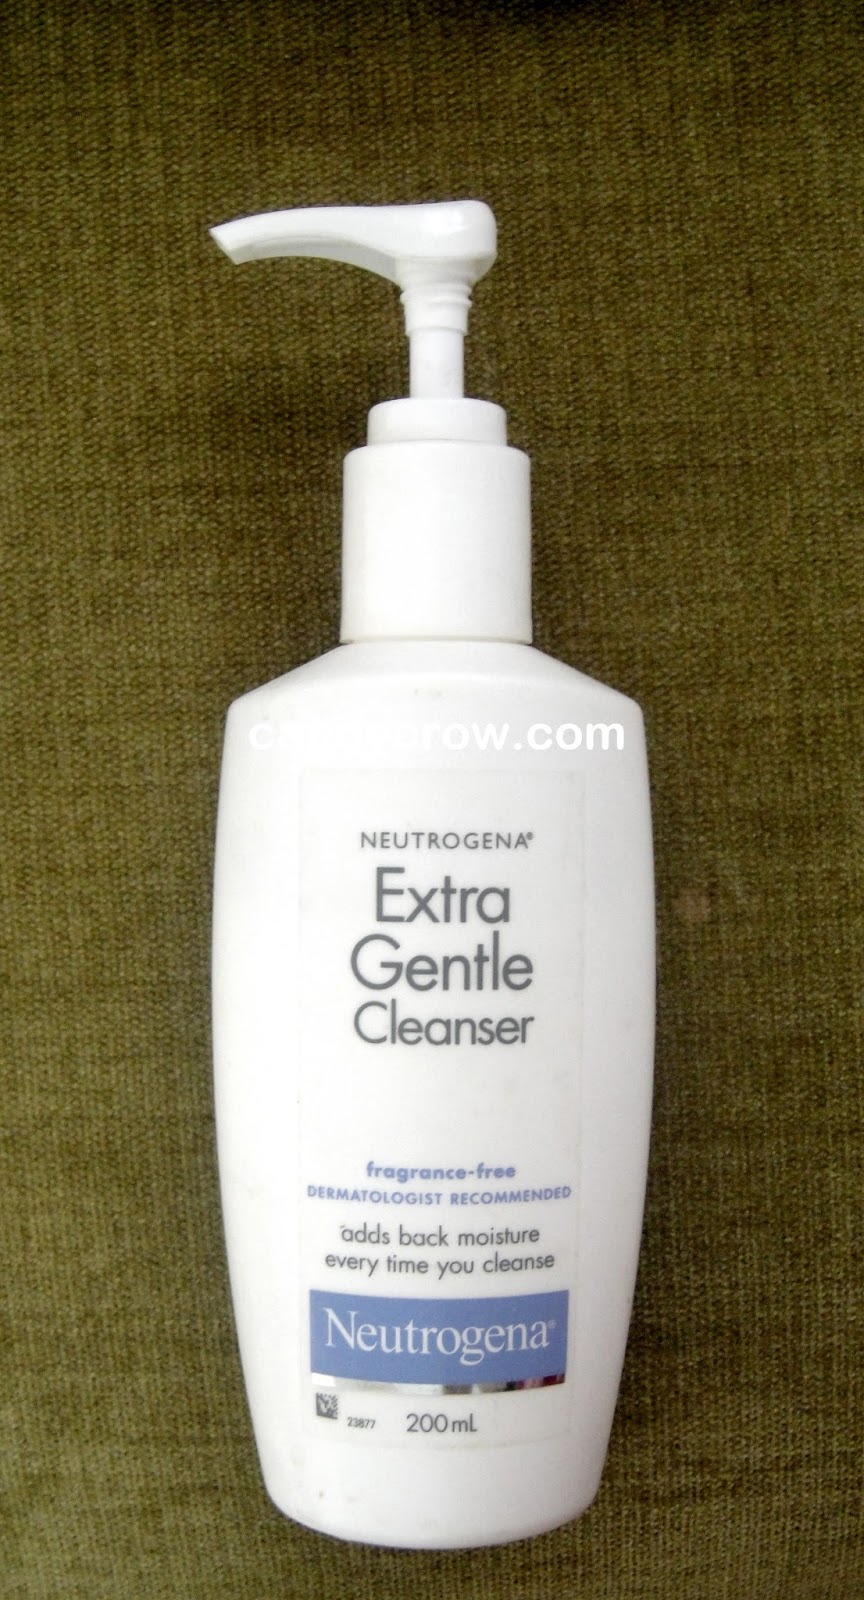 Neutrogena extra gentle cleanser review